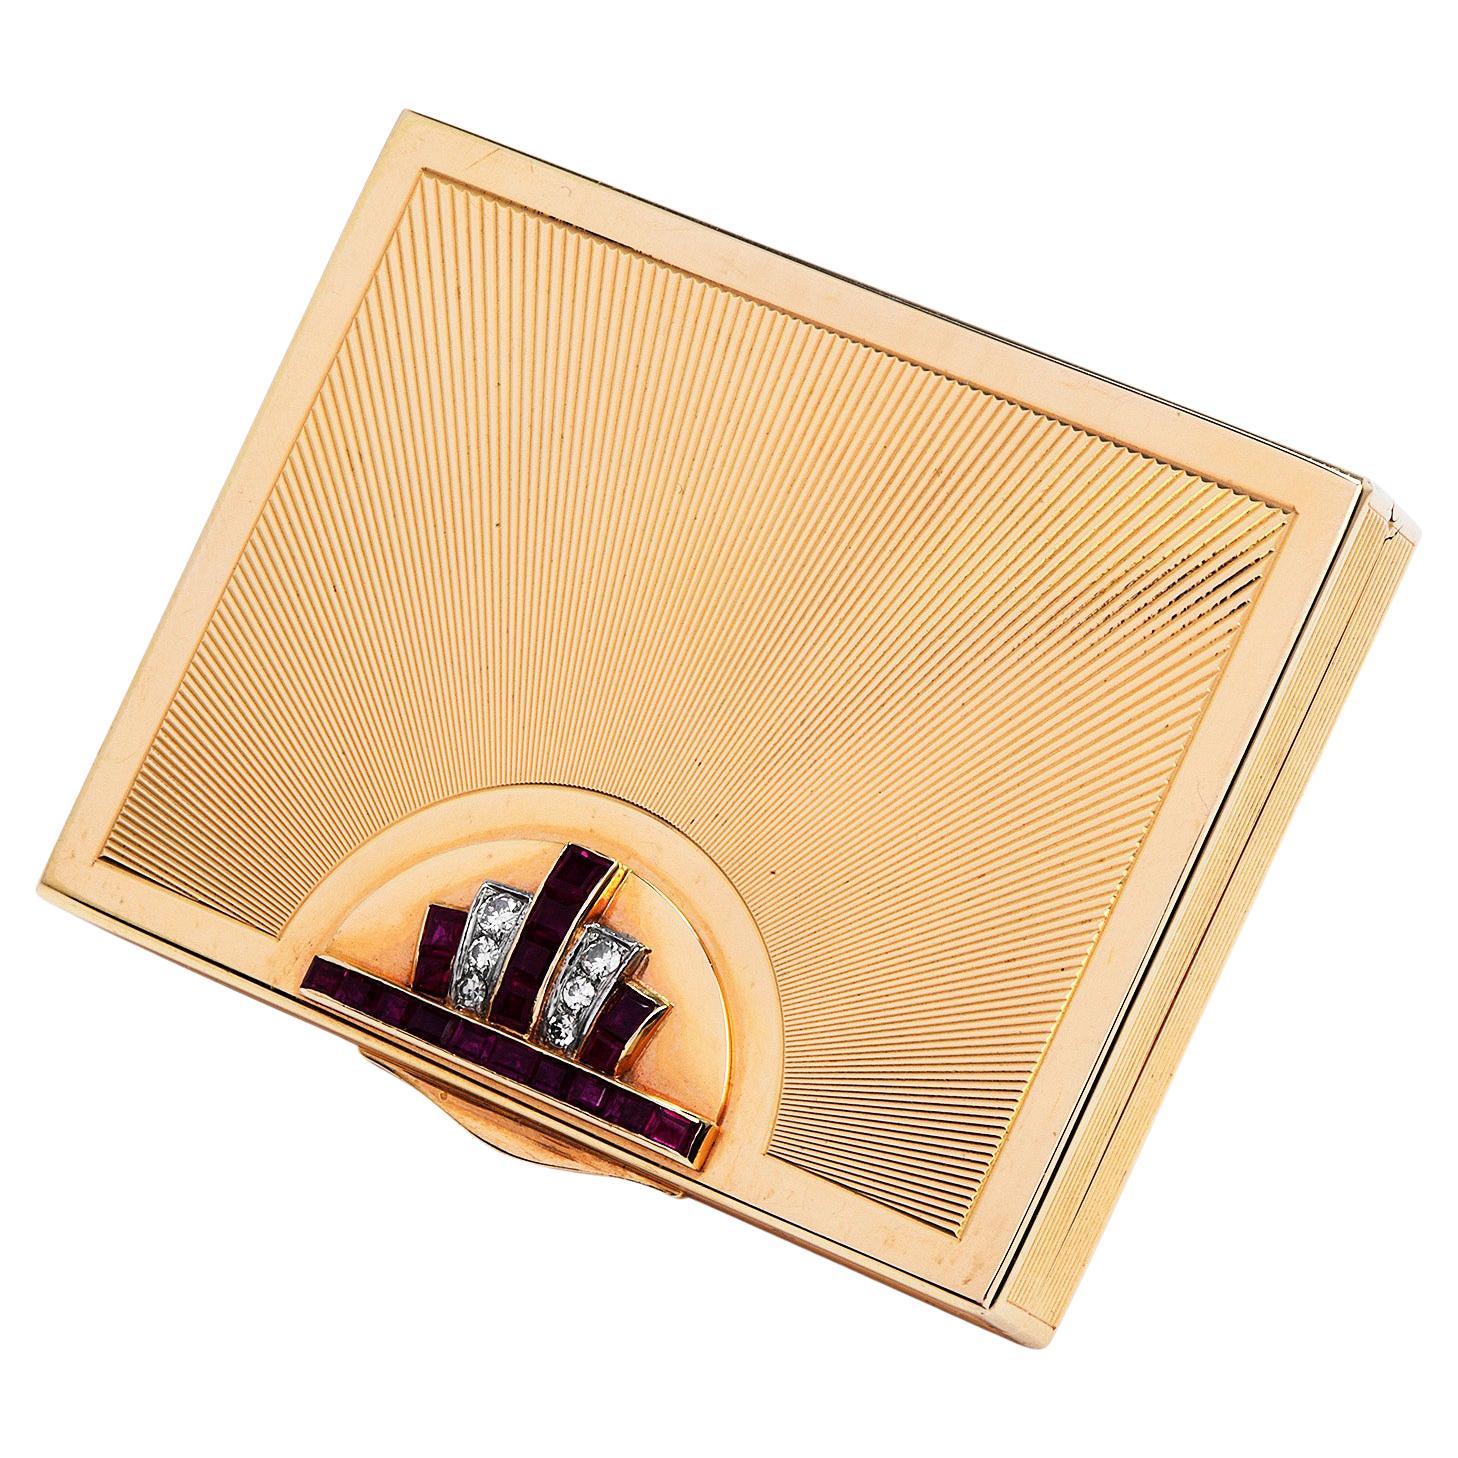 This retro authentic compact 14k Gold box, has a textured design with rubies & diamonds.
 it is crafted in solid 14K yellow gold, weighing 89.1 grams and measuring 2 3/4